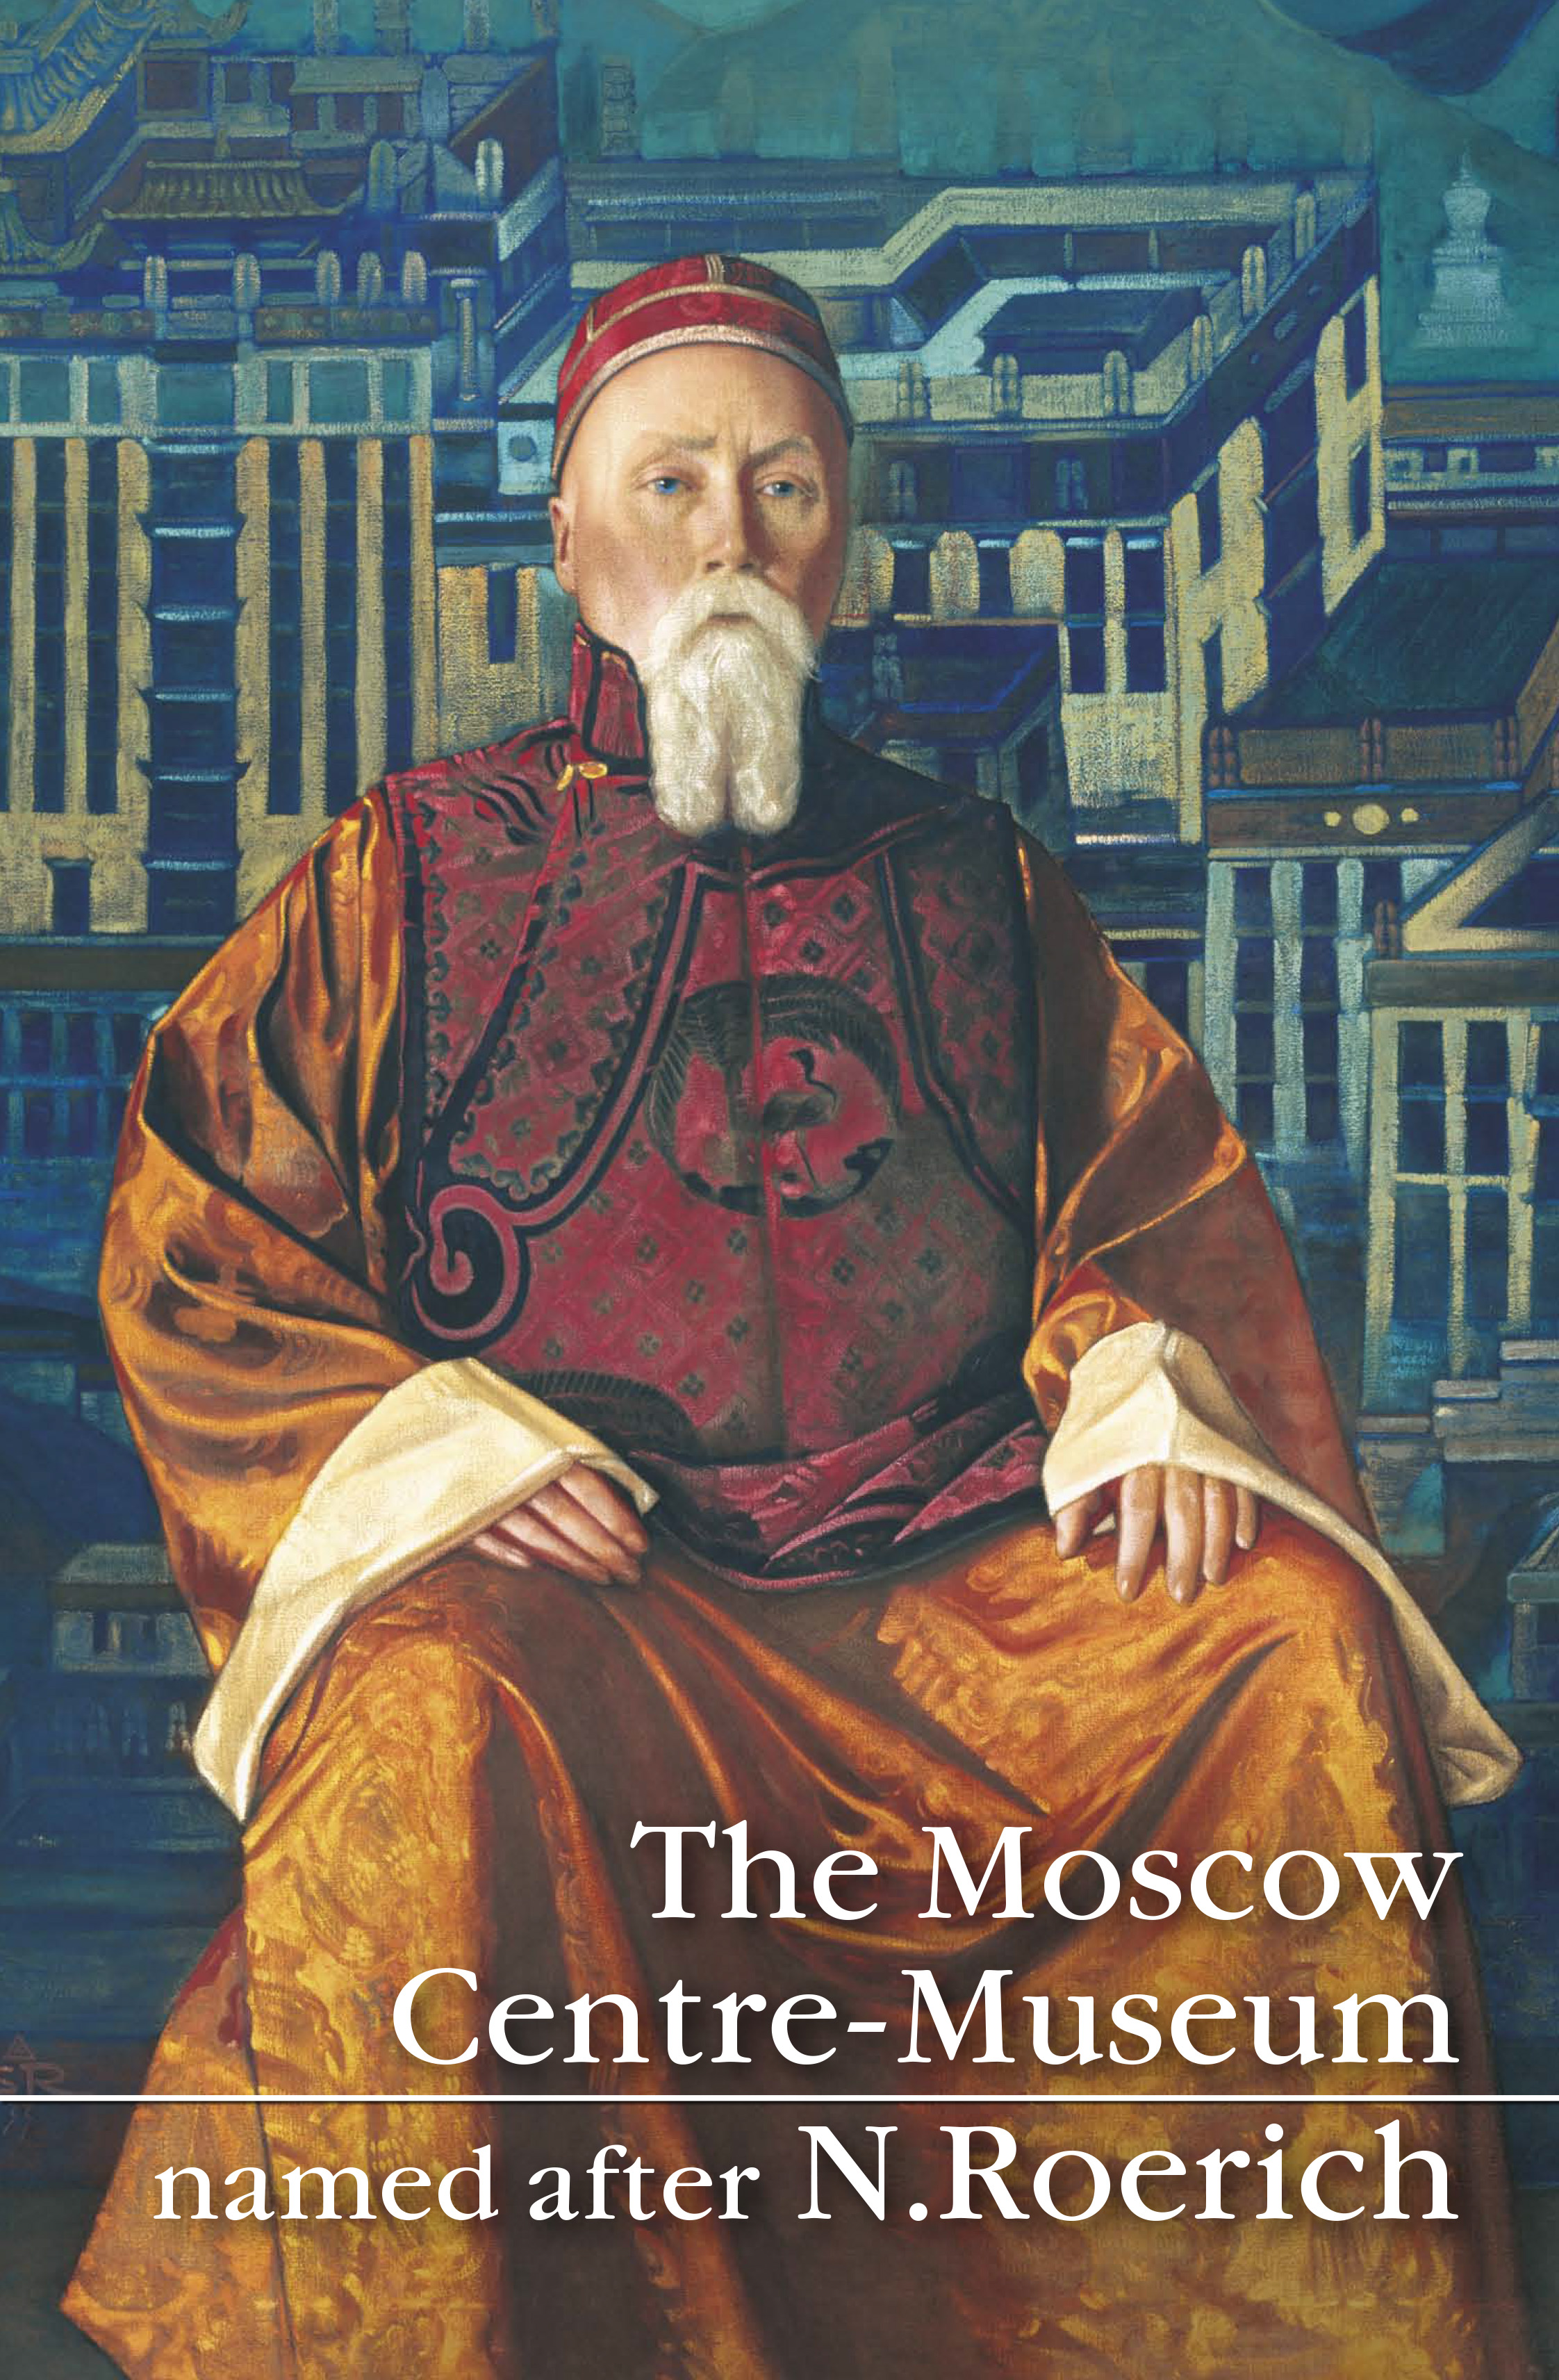 The Moscow Centre-Museum named after N.Roerich